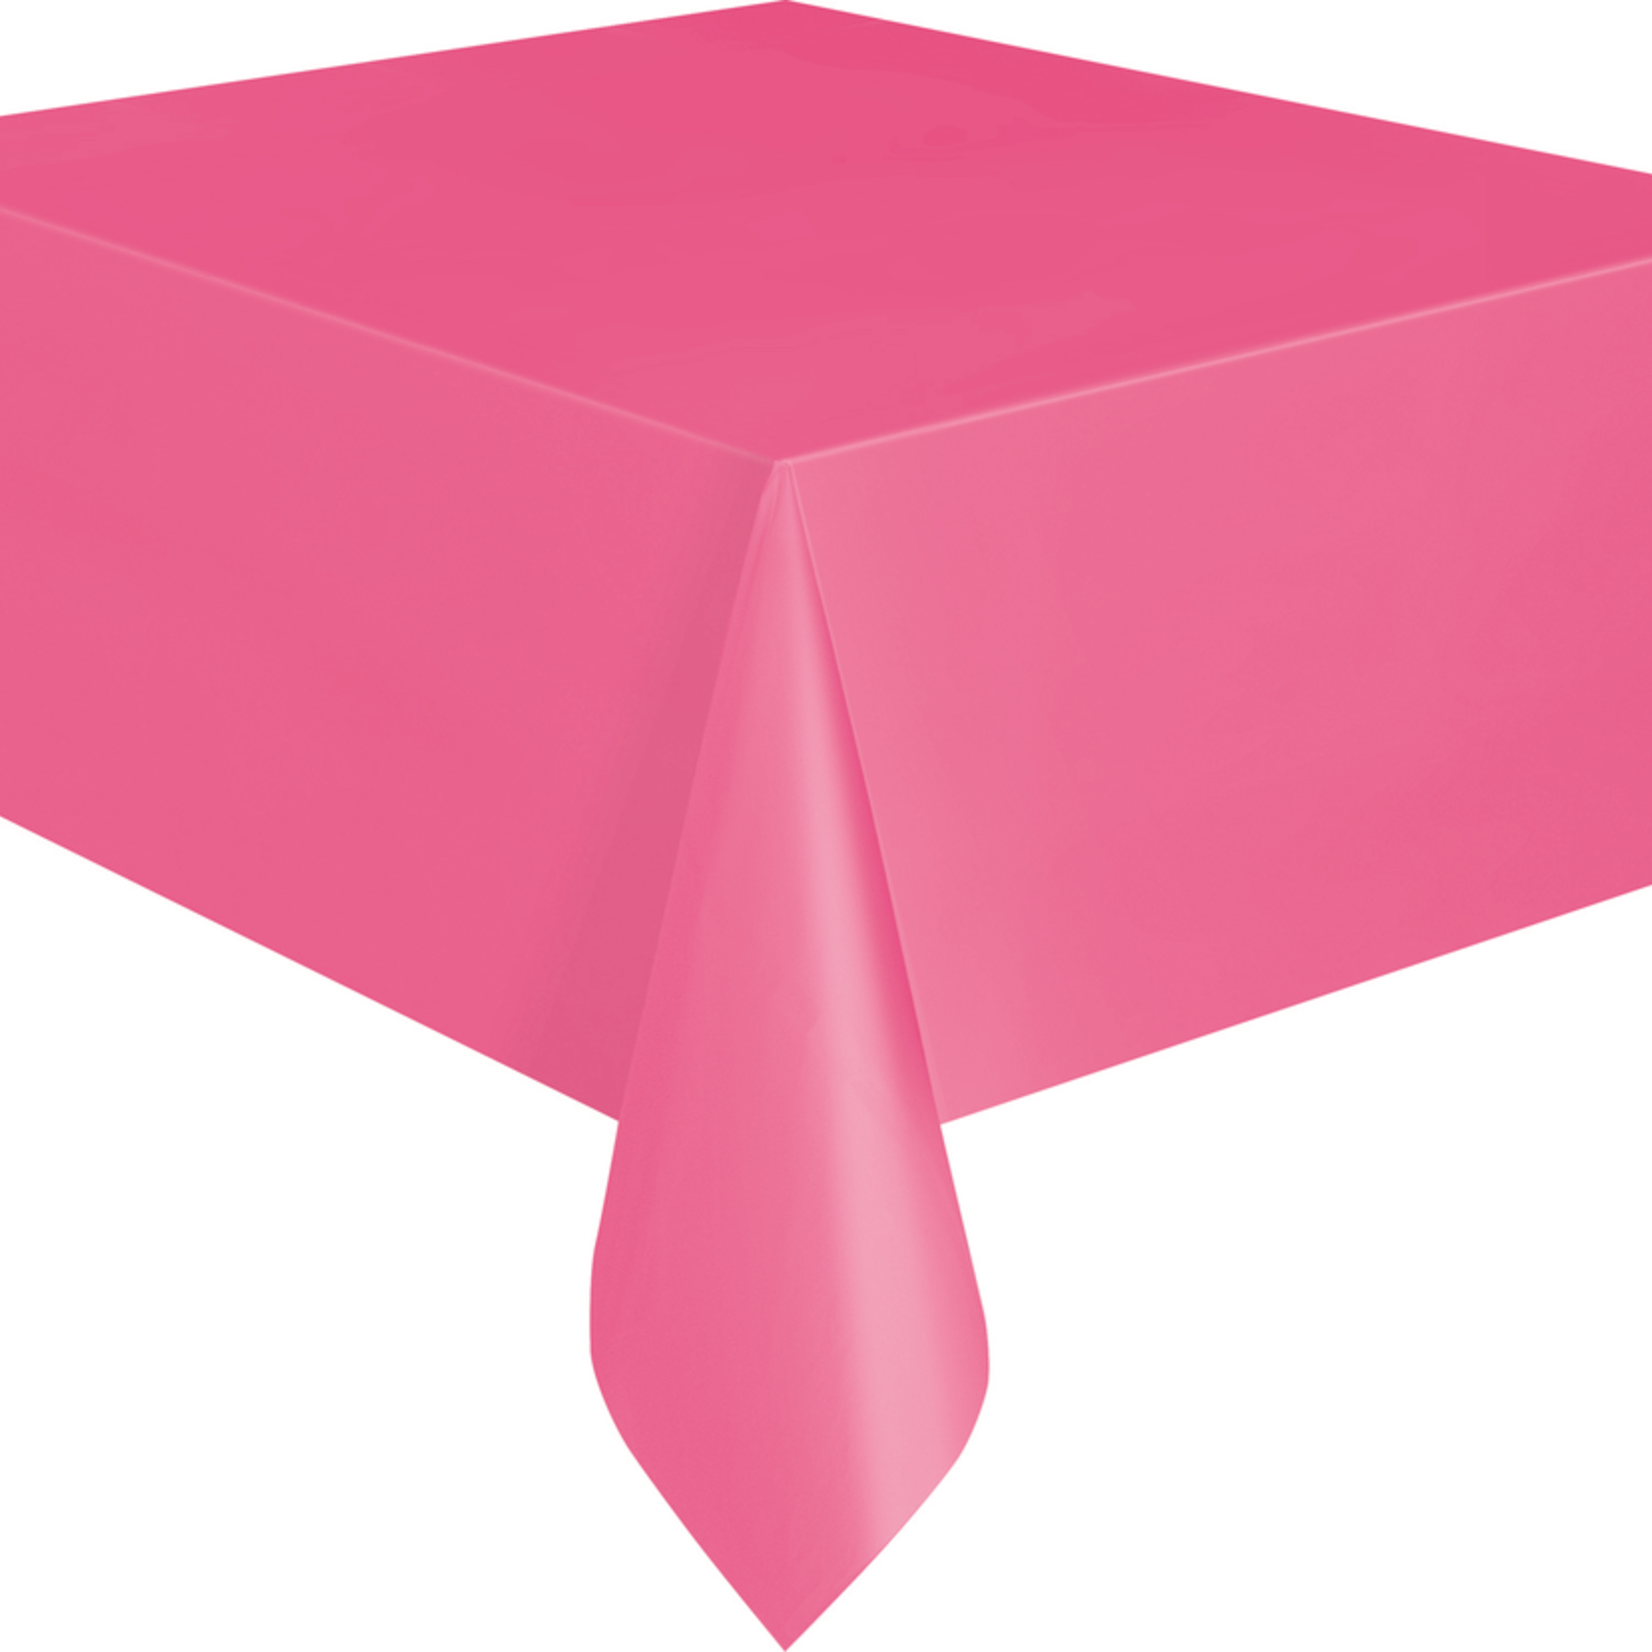 Plastic Tablecover 54""x108"" -Hot Pink